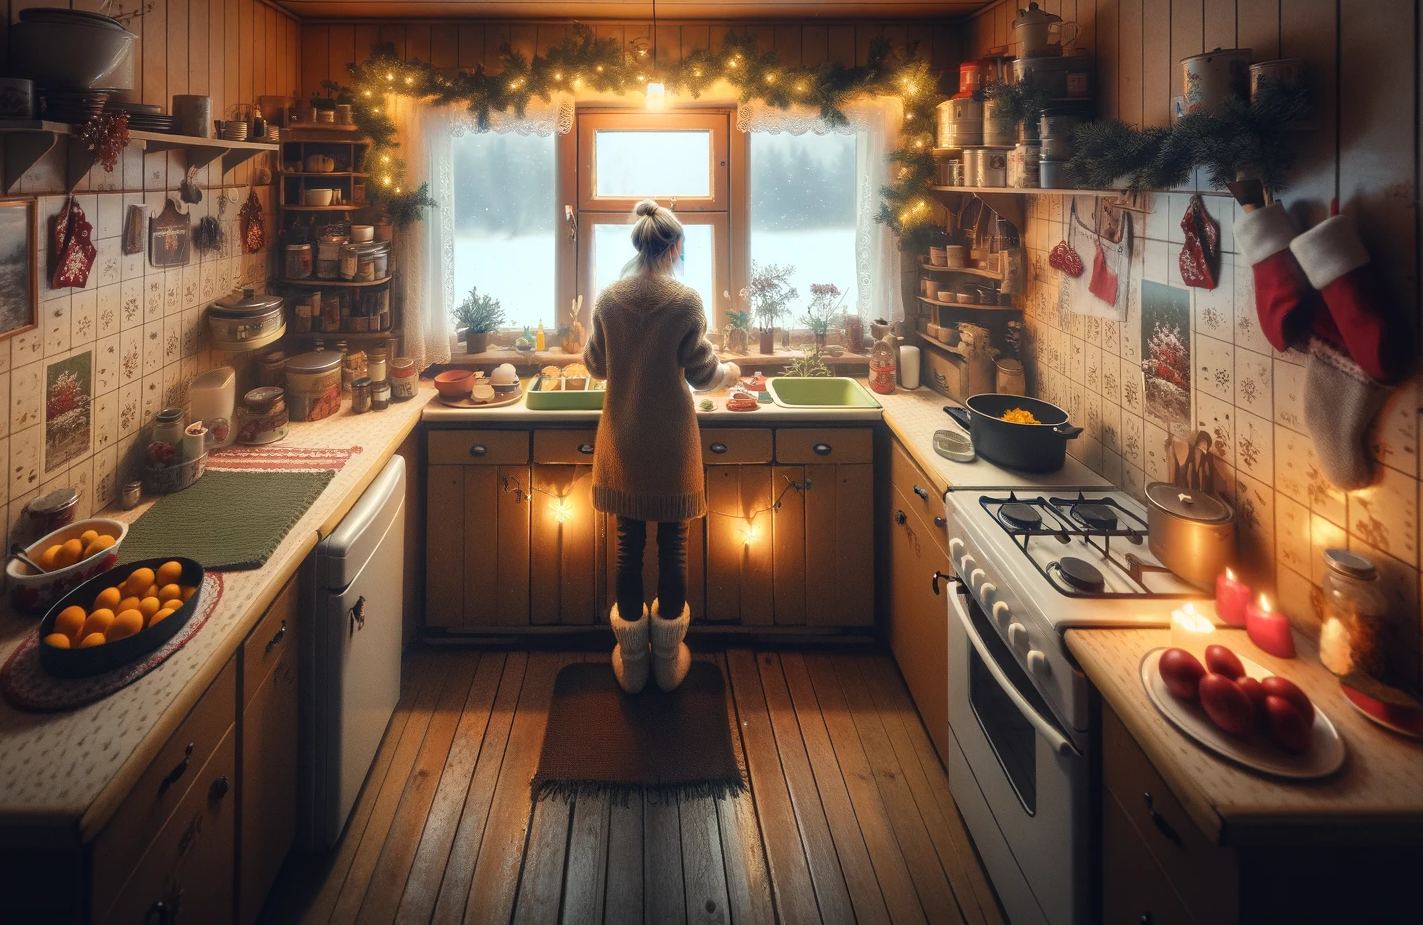 Woman cooking a holiday meal in the kitchen